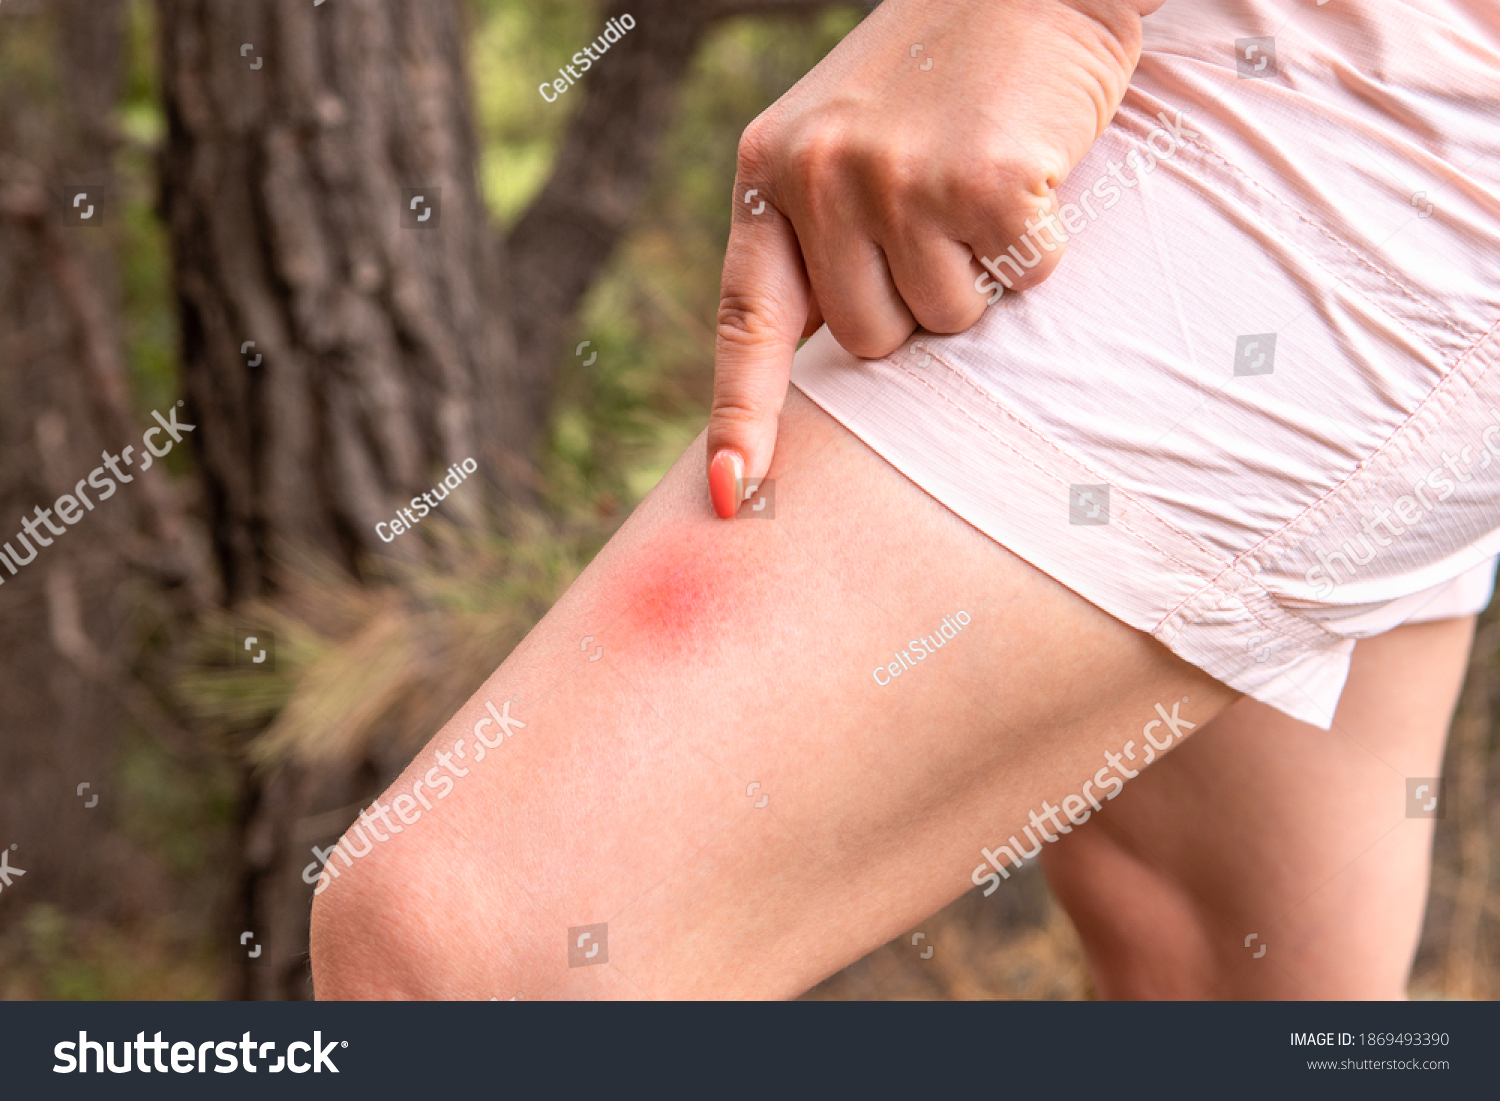 woman shows her finger at an insect bite. The leg with red spot caused by insect bite on leg skin. Insect Bite. concept of protection from insect bites #1869493390